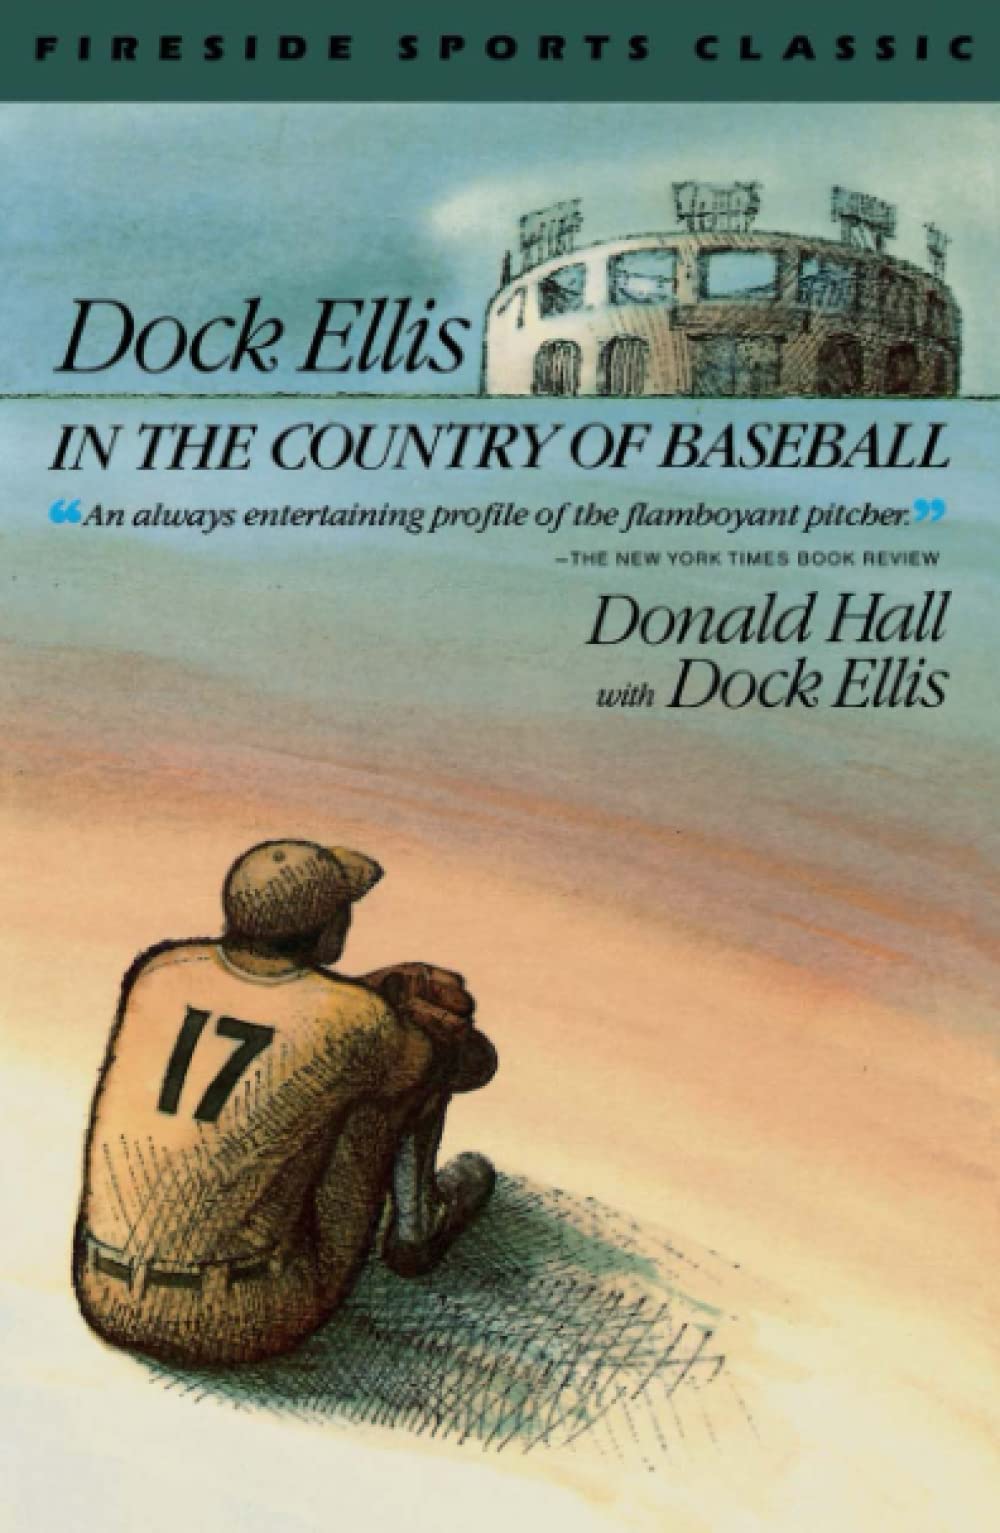 Dock Ellis in the Country of Baseball, by Donald Hall & Dock Ellis